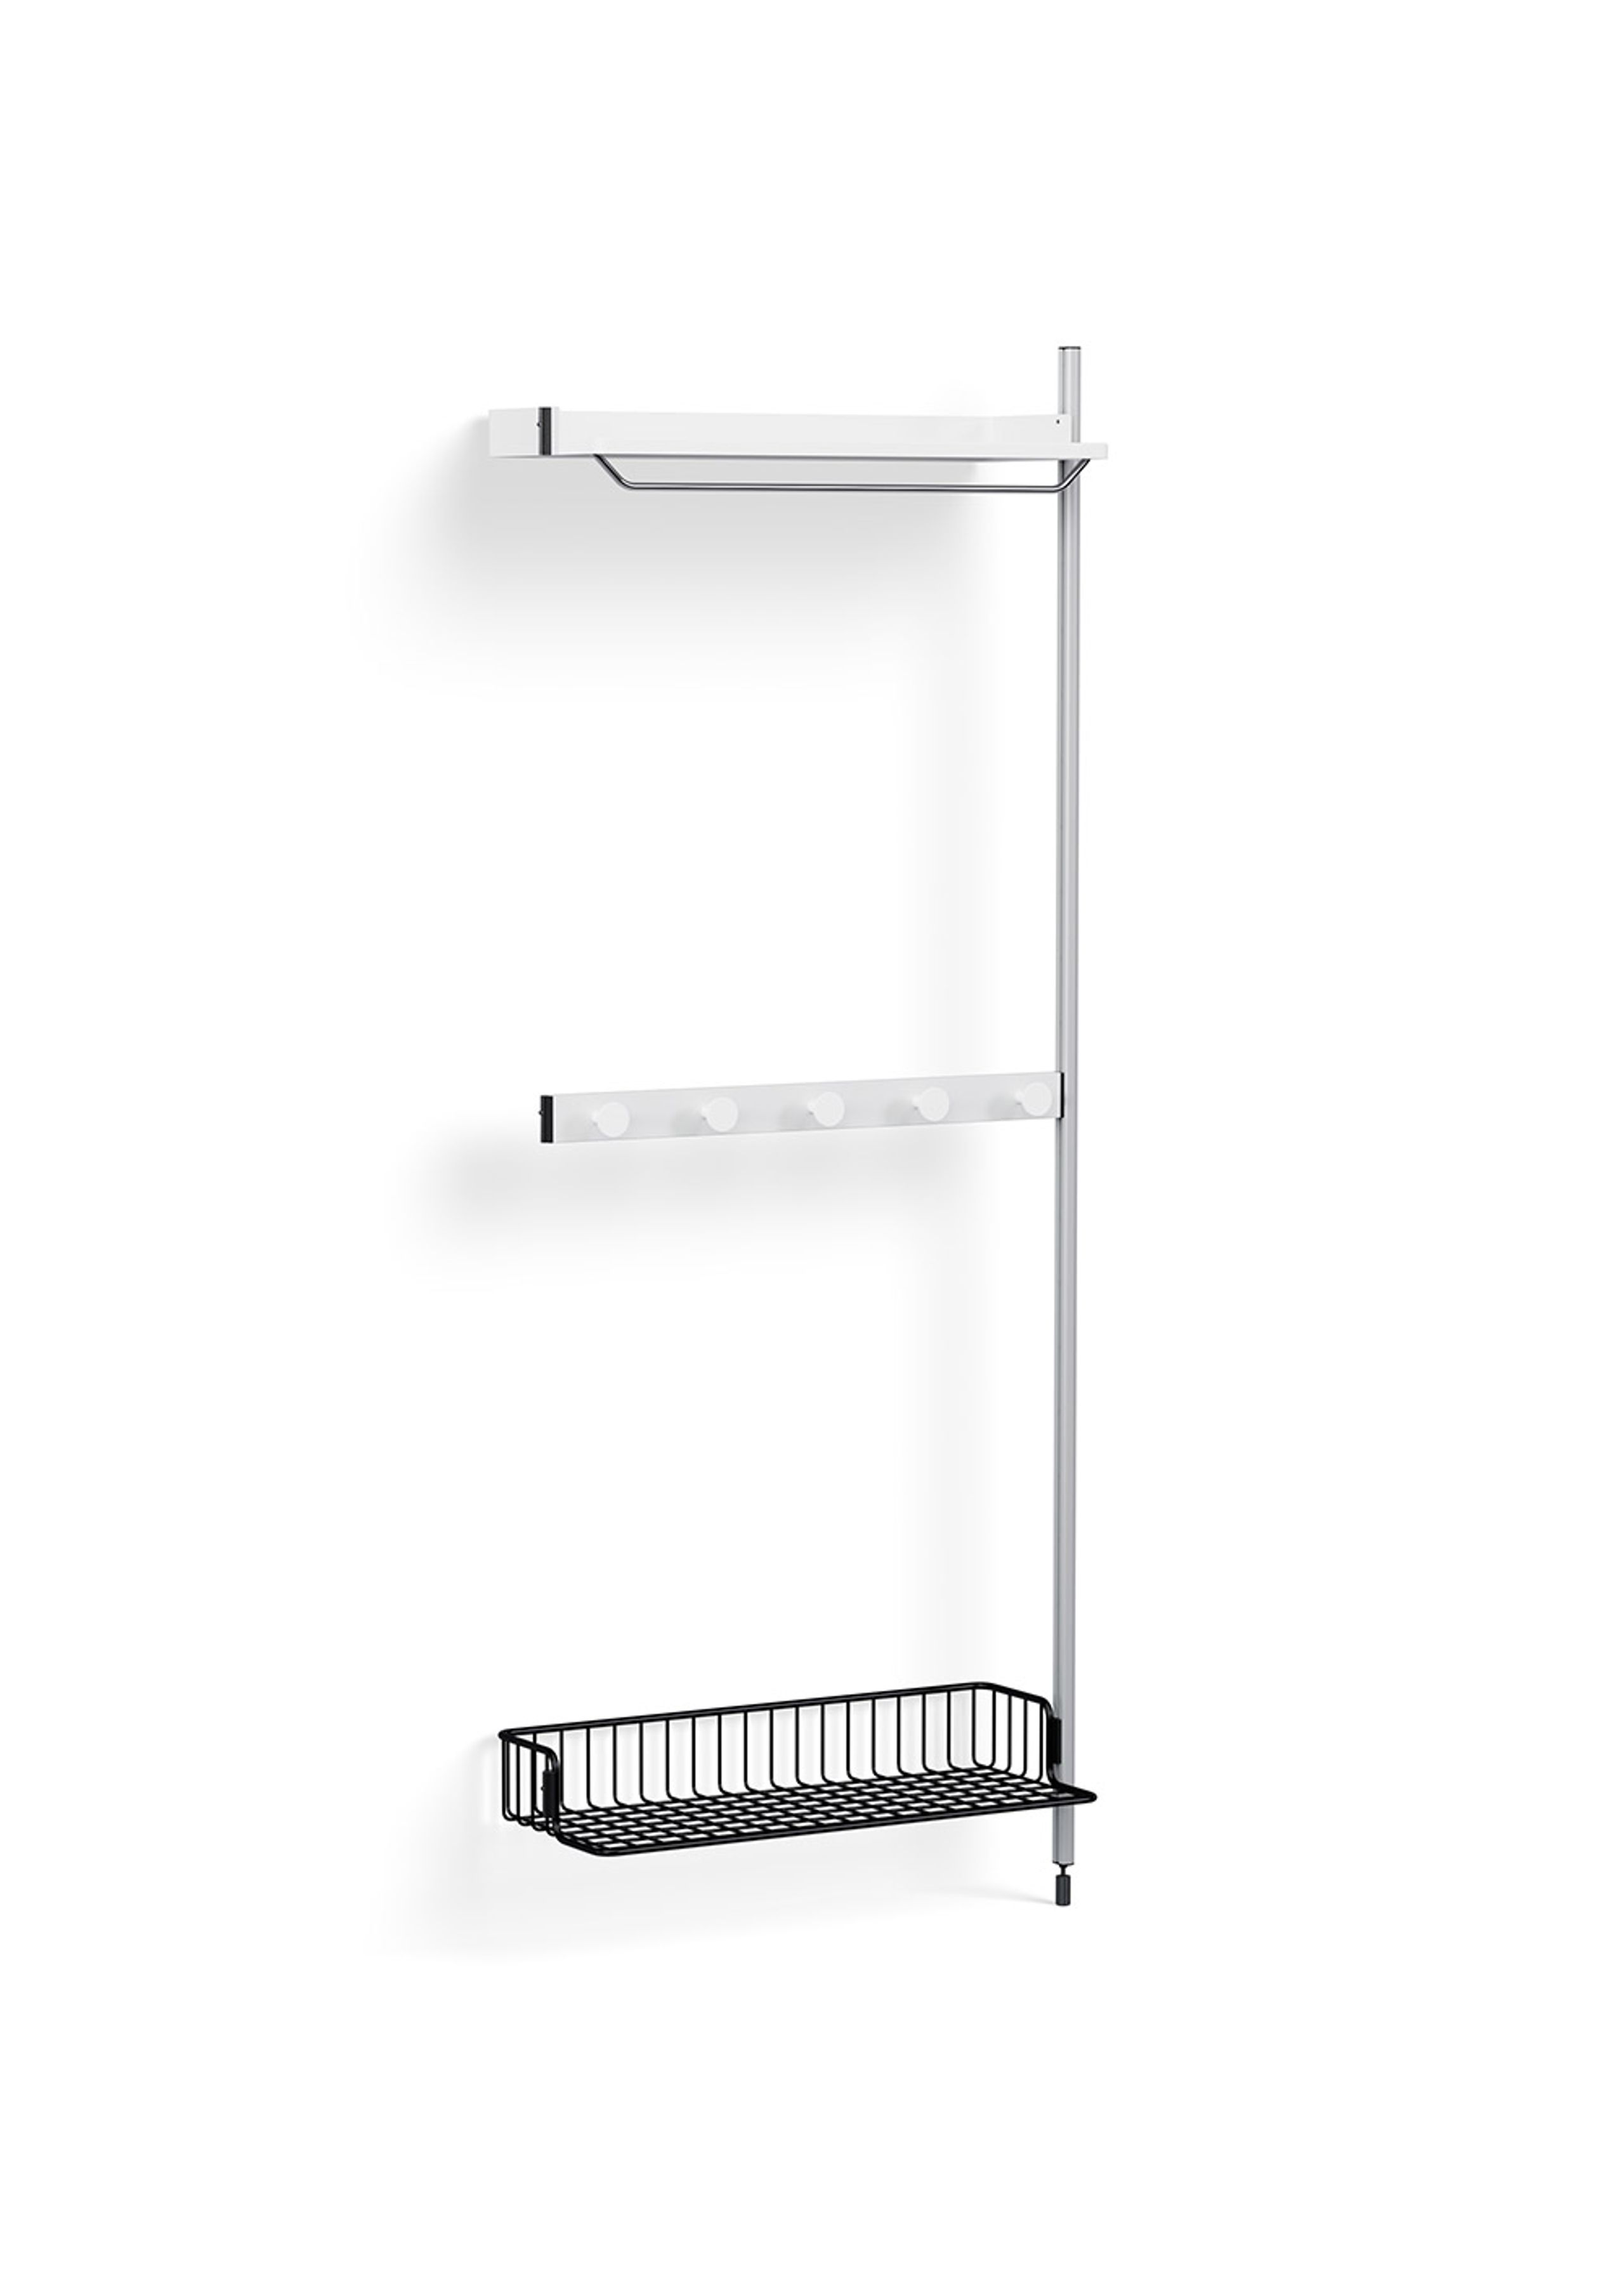 HAY - Reol - Pier System / No. 1040 - White / Clear Anodised Aluminium